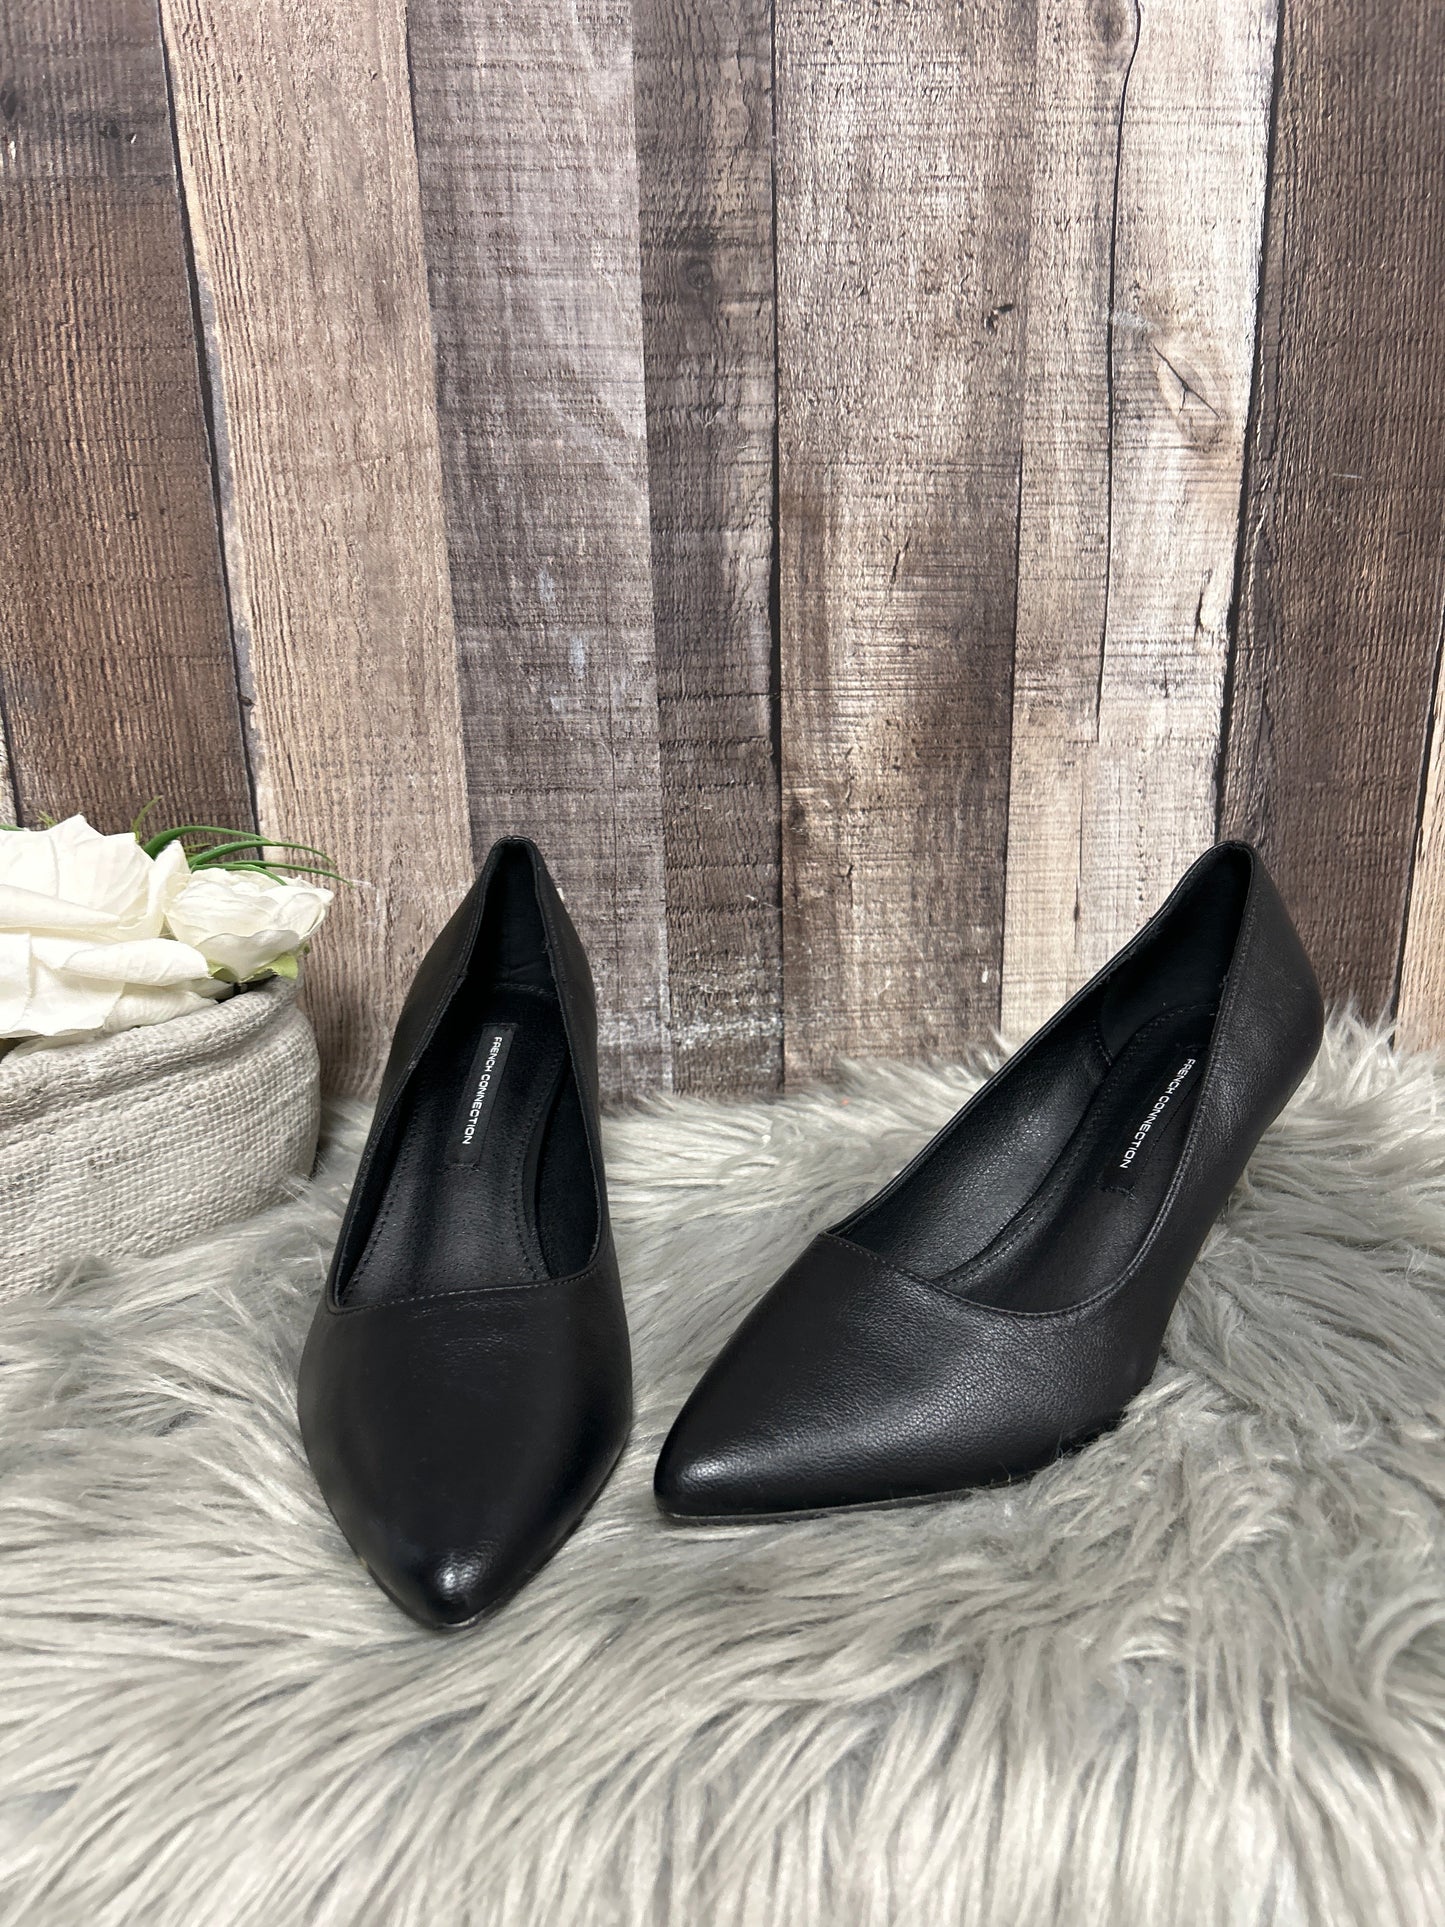 Black Shoes Heels Stiletto French Connection, Size 8.5